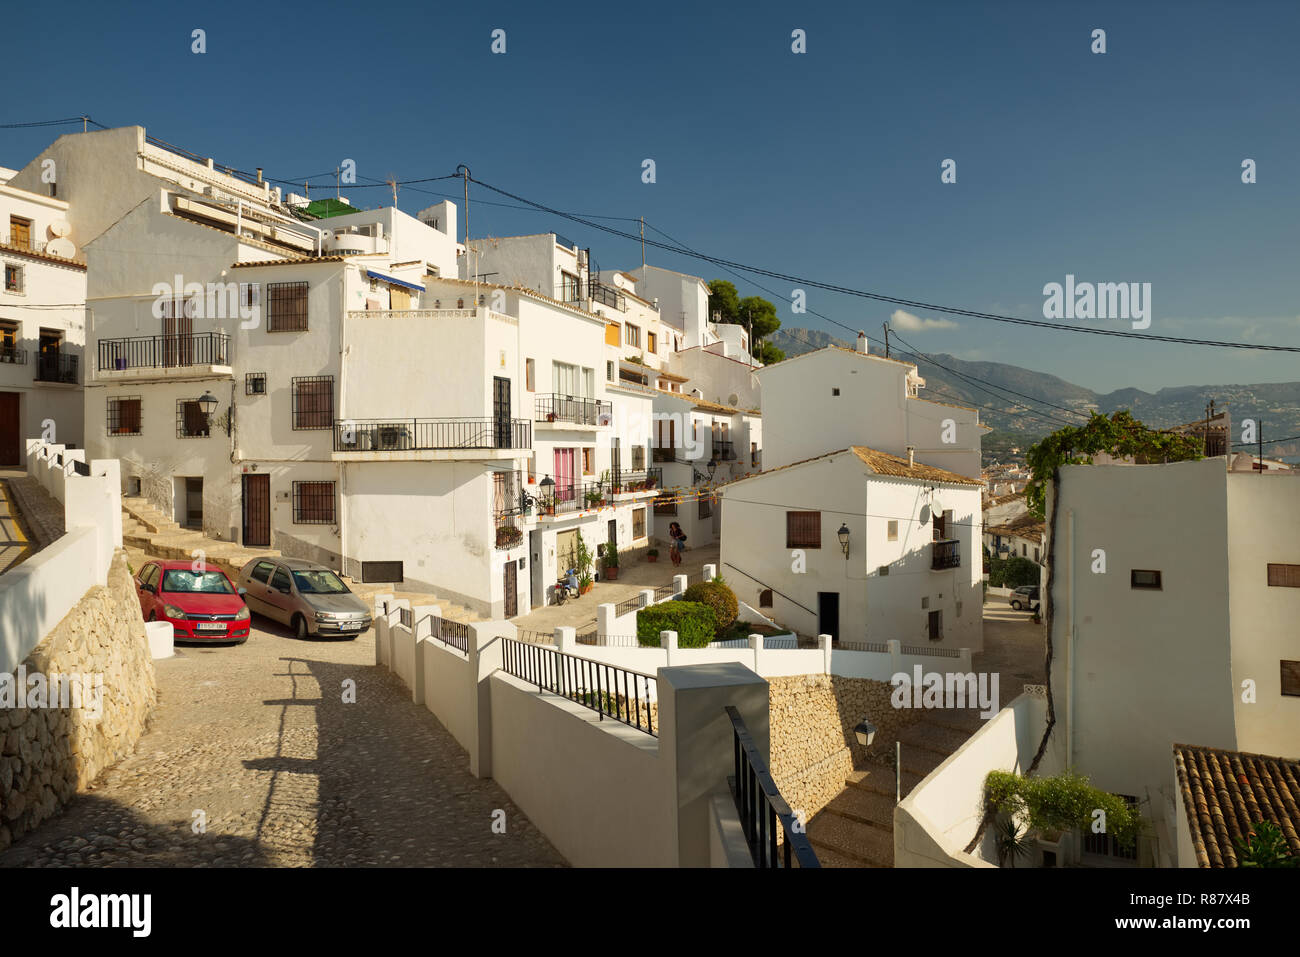 Houses, apartments and narrow streets in Altea, province of Alicante, Spain. Stock Photo